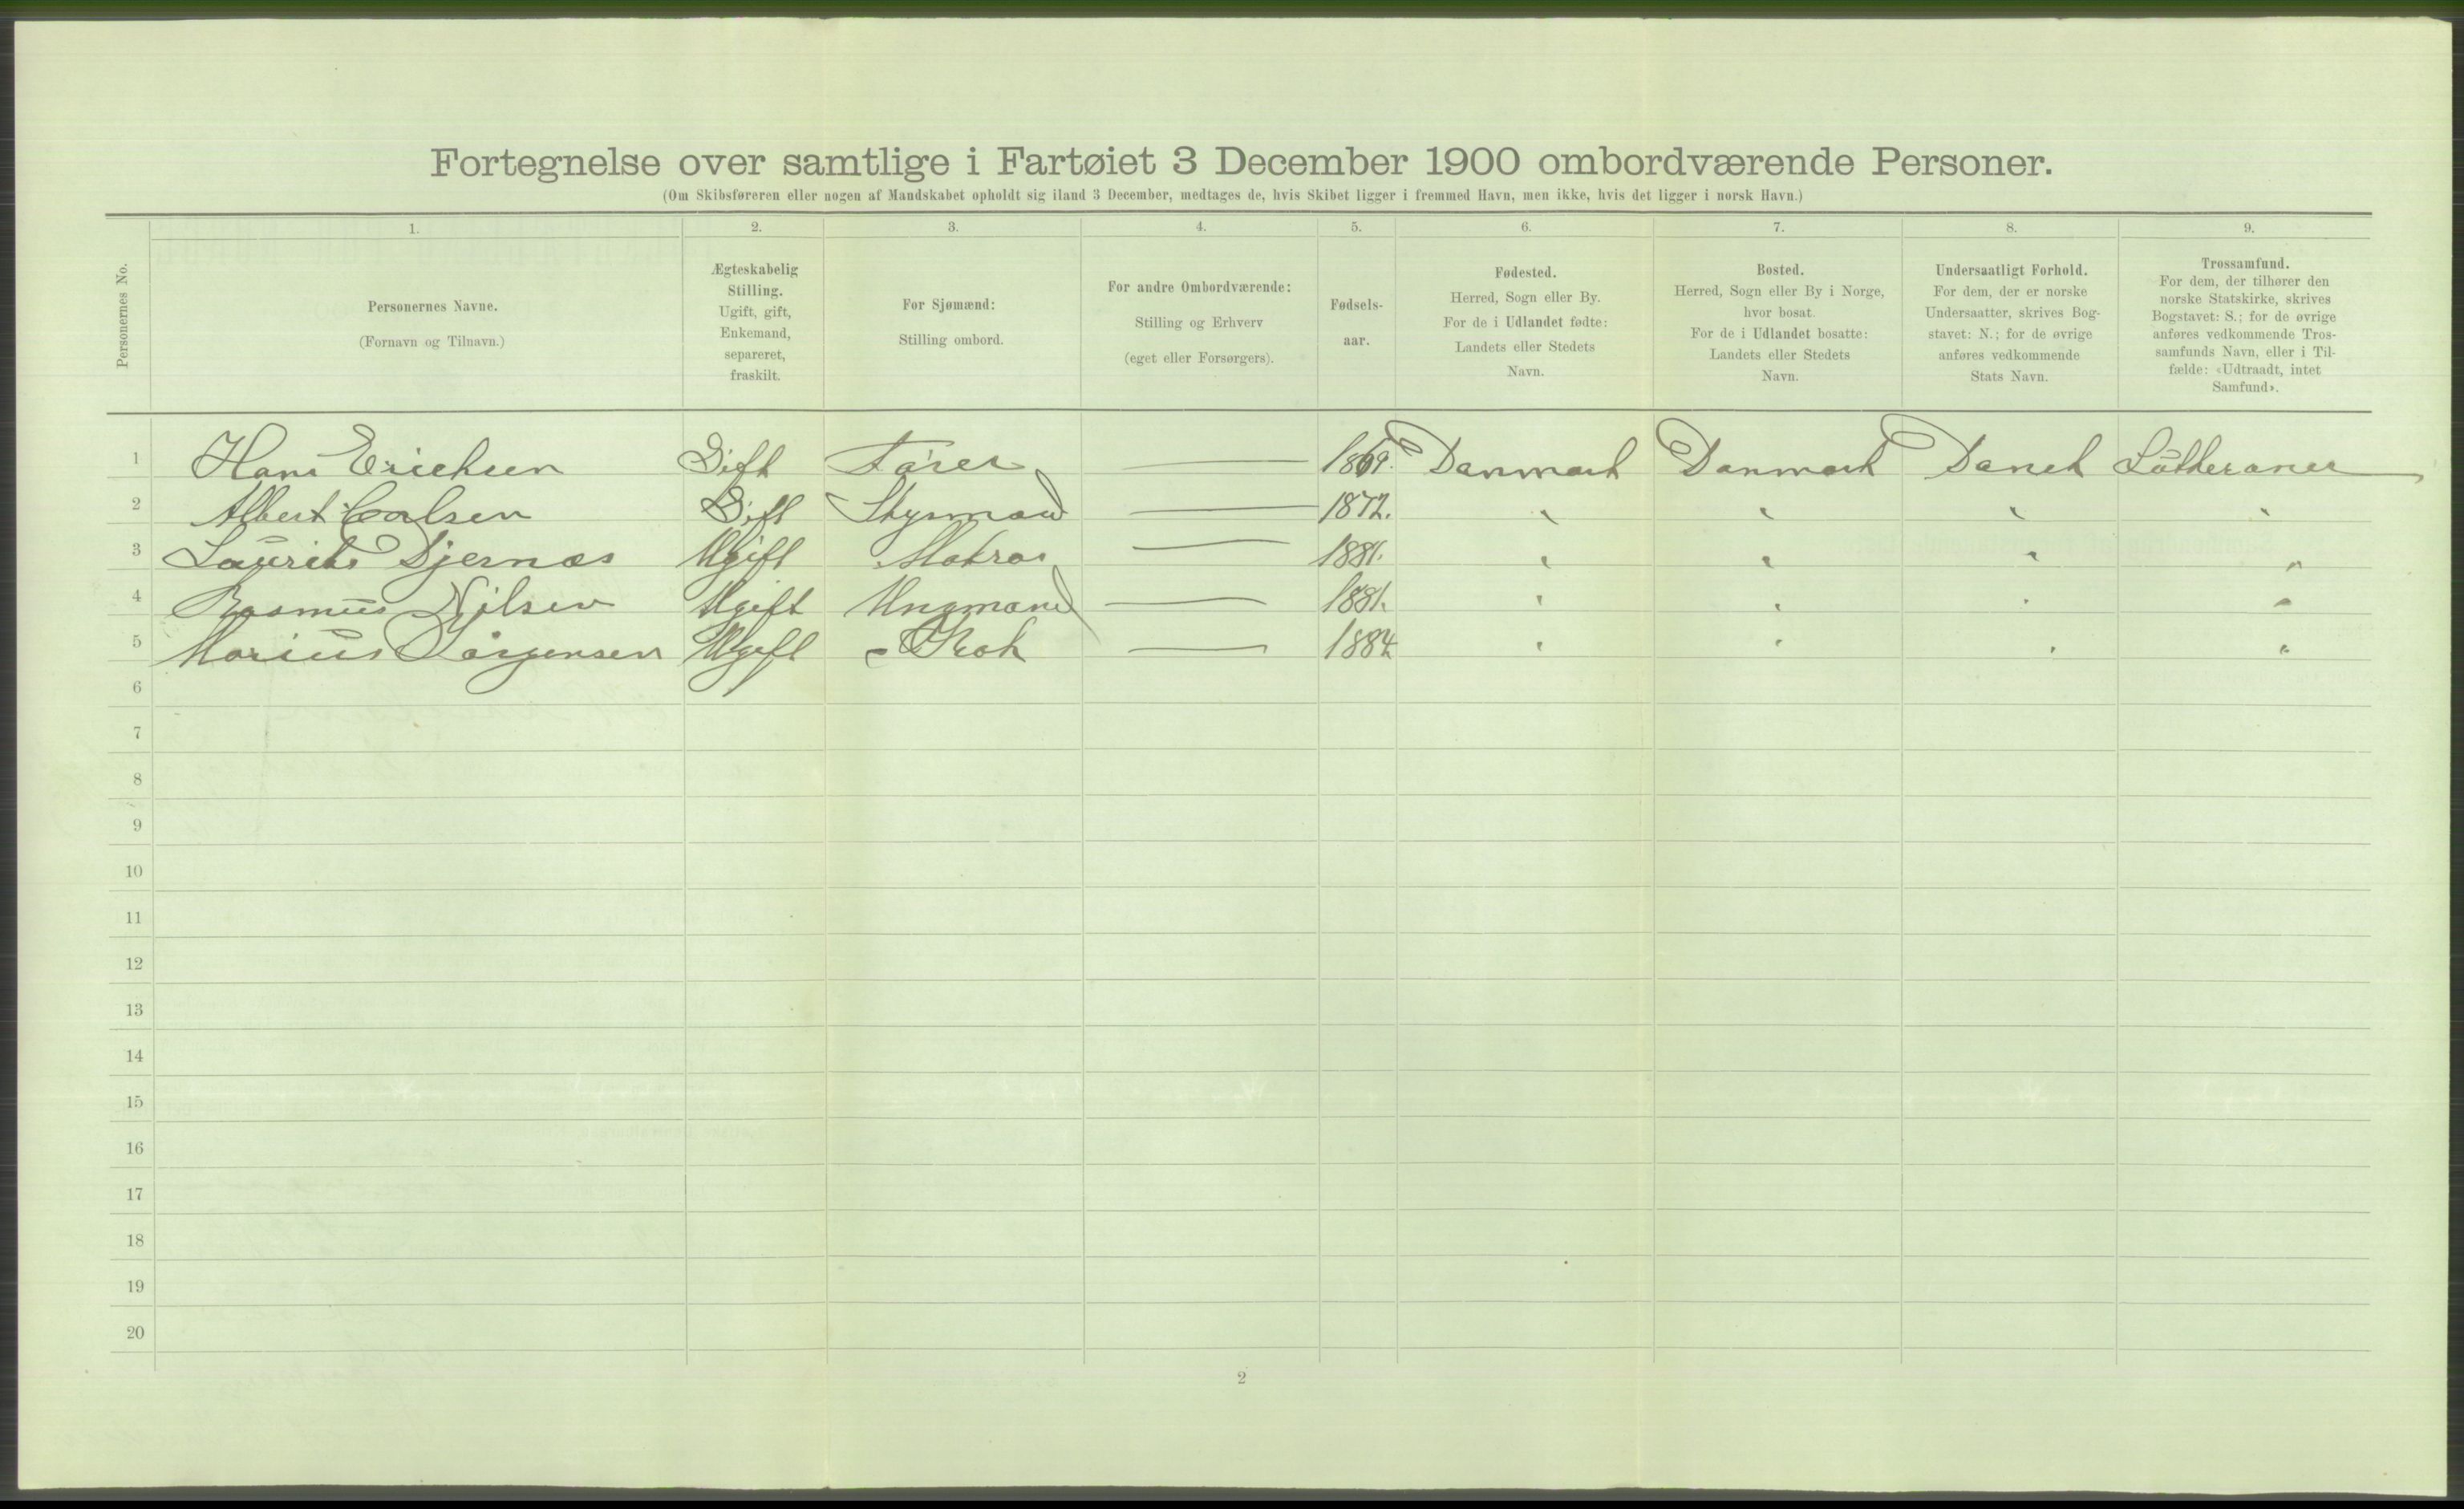 RA, 1900 Census - ship lists from ships in Norwegian harbours, harbours abroad and at sea, 1900, p. 154